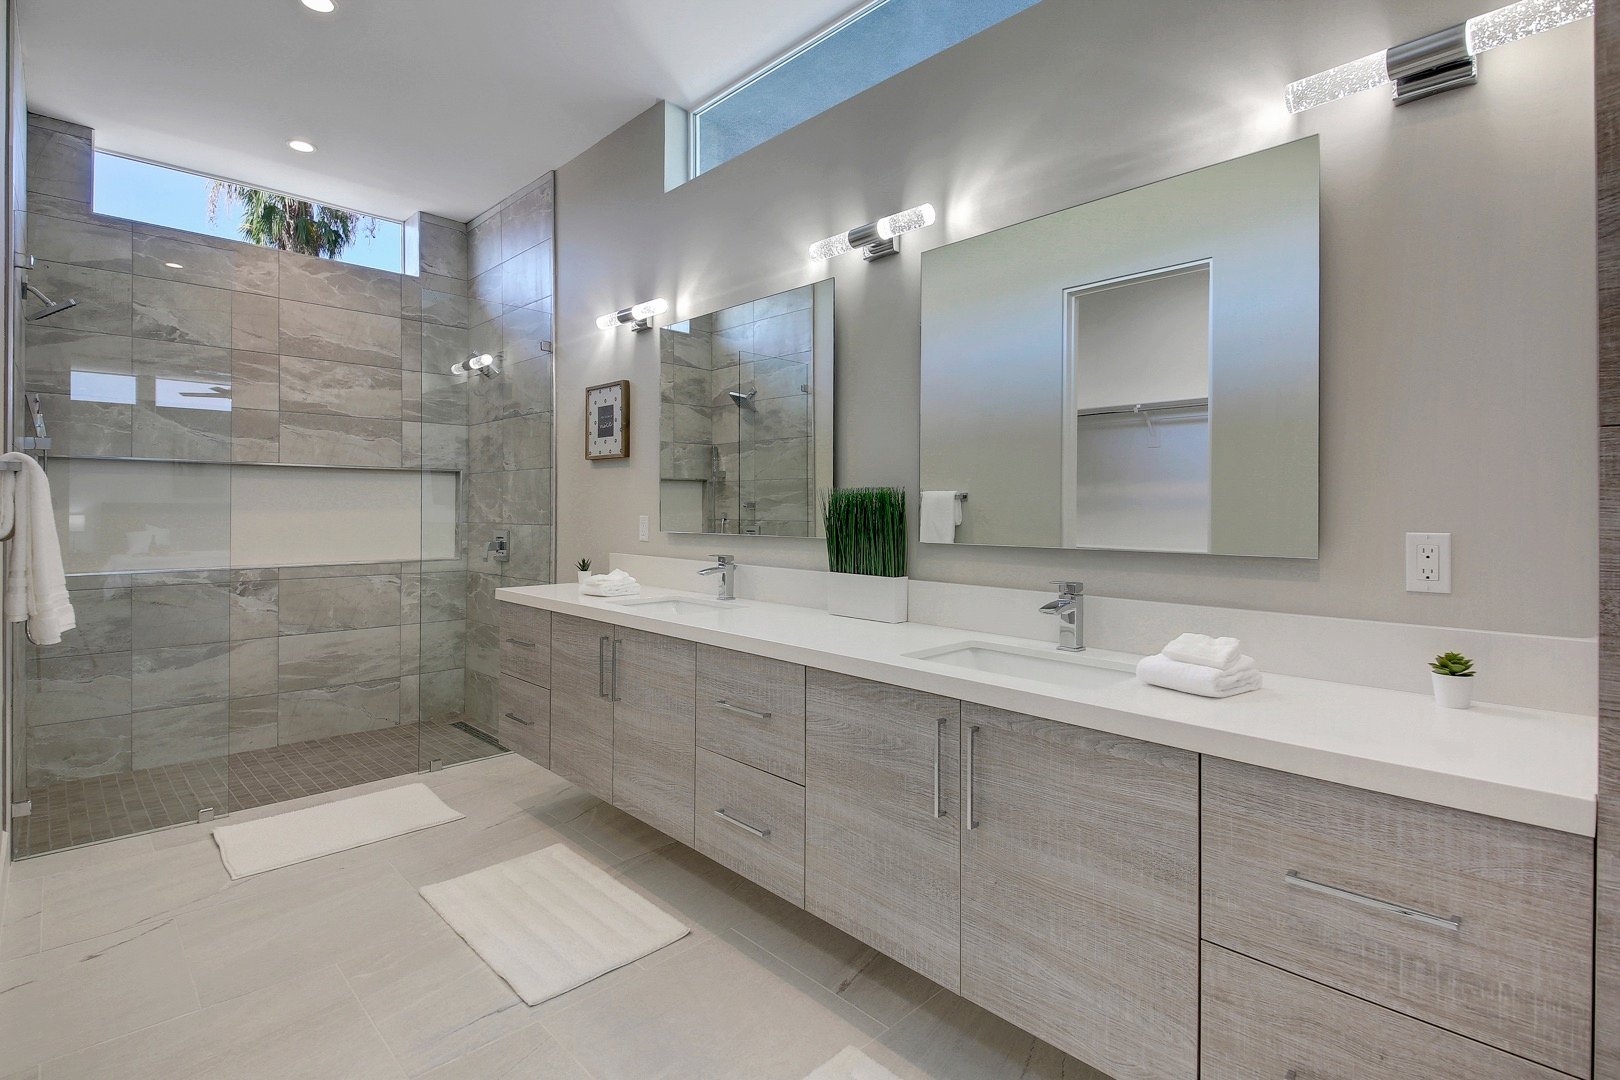 Private, en suite bathroom features a tile shower with double shower heads and two vanity sinks.